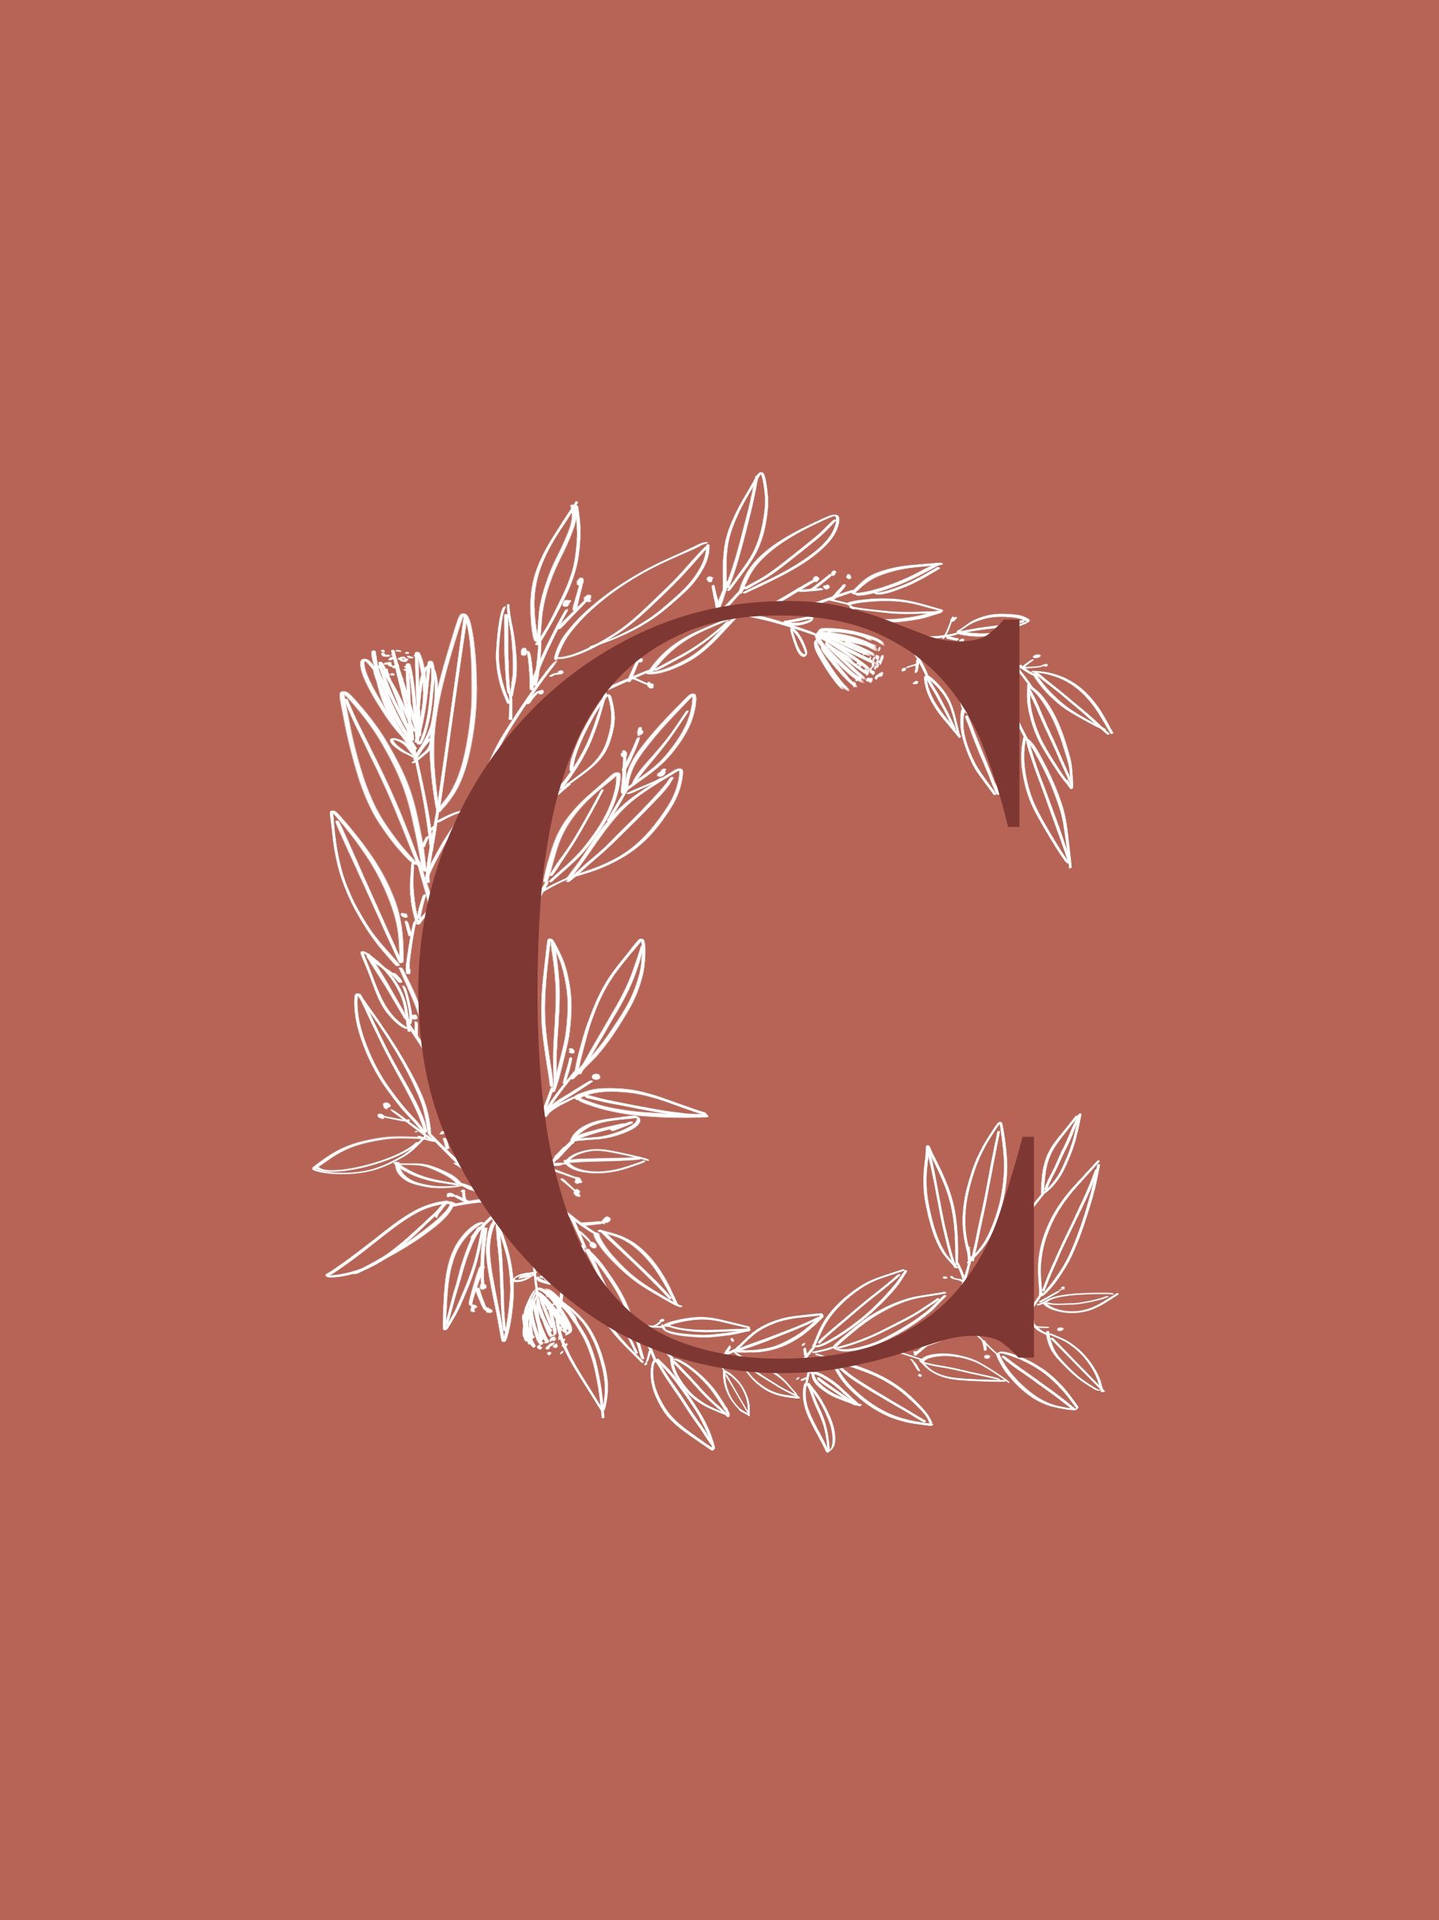 Aesthetic Letter C With Leaves